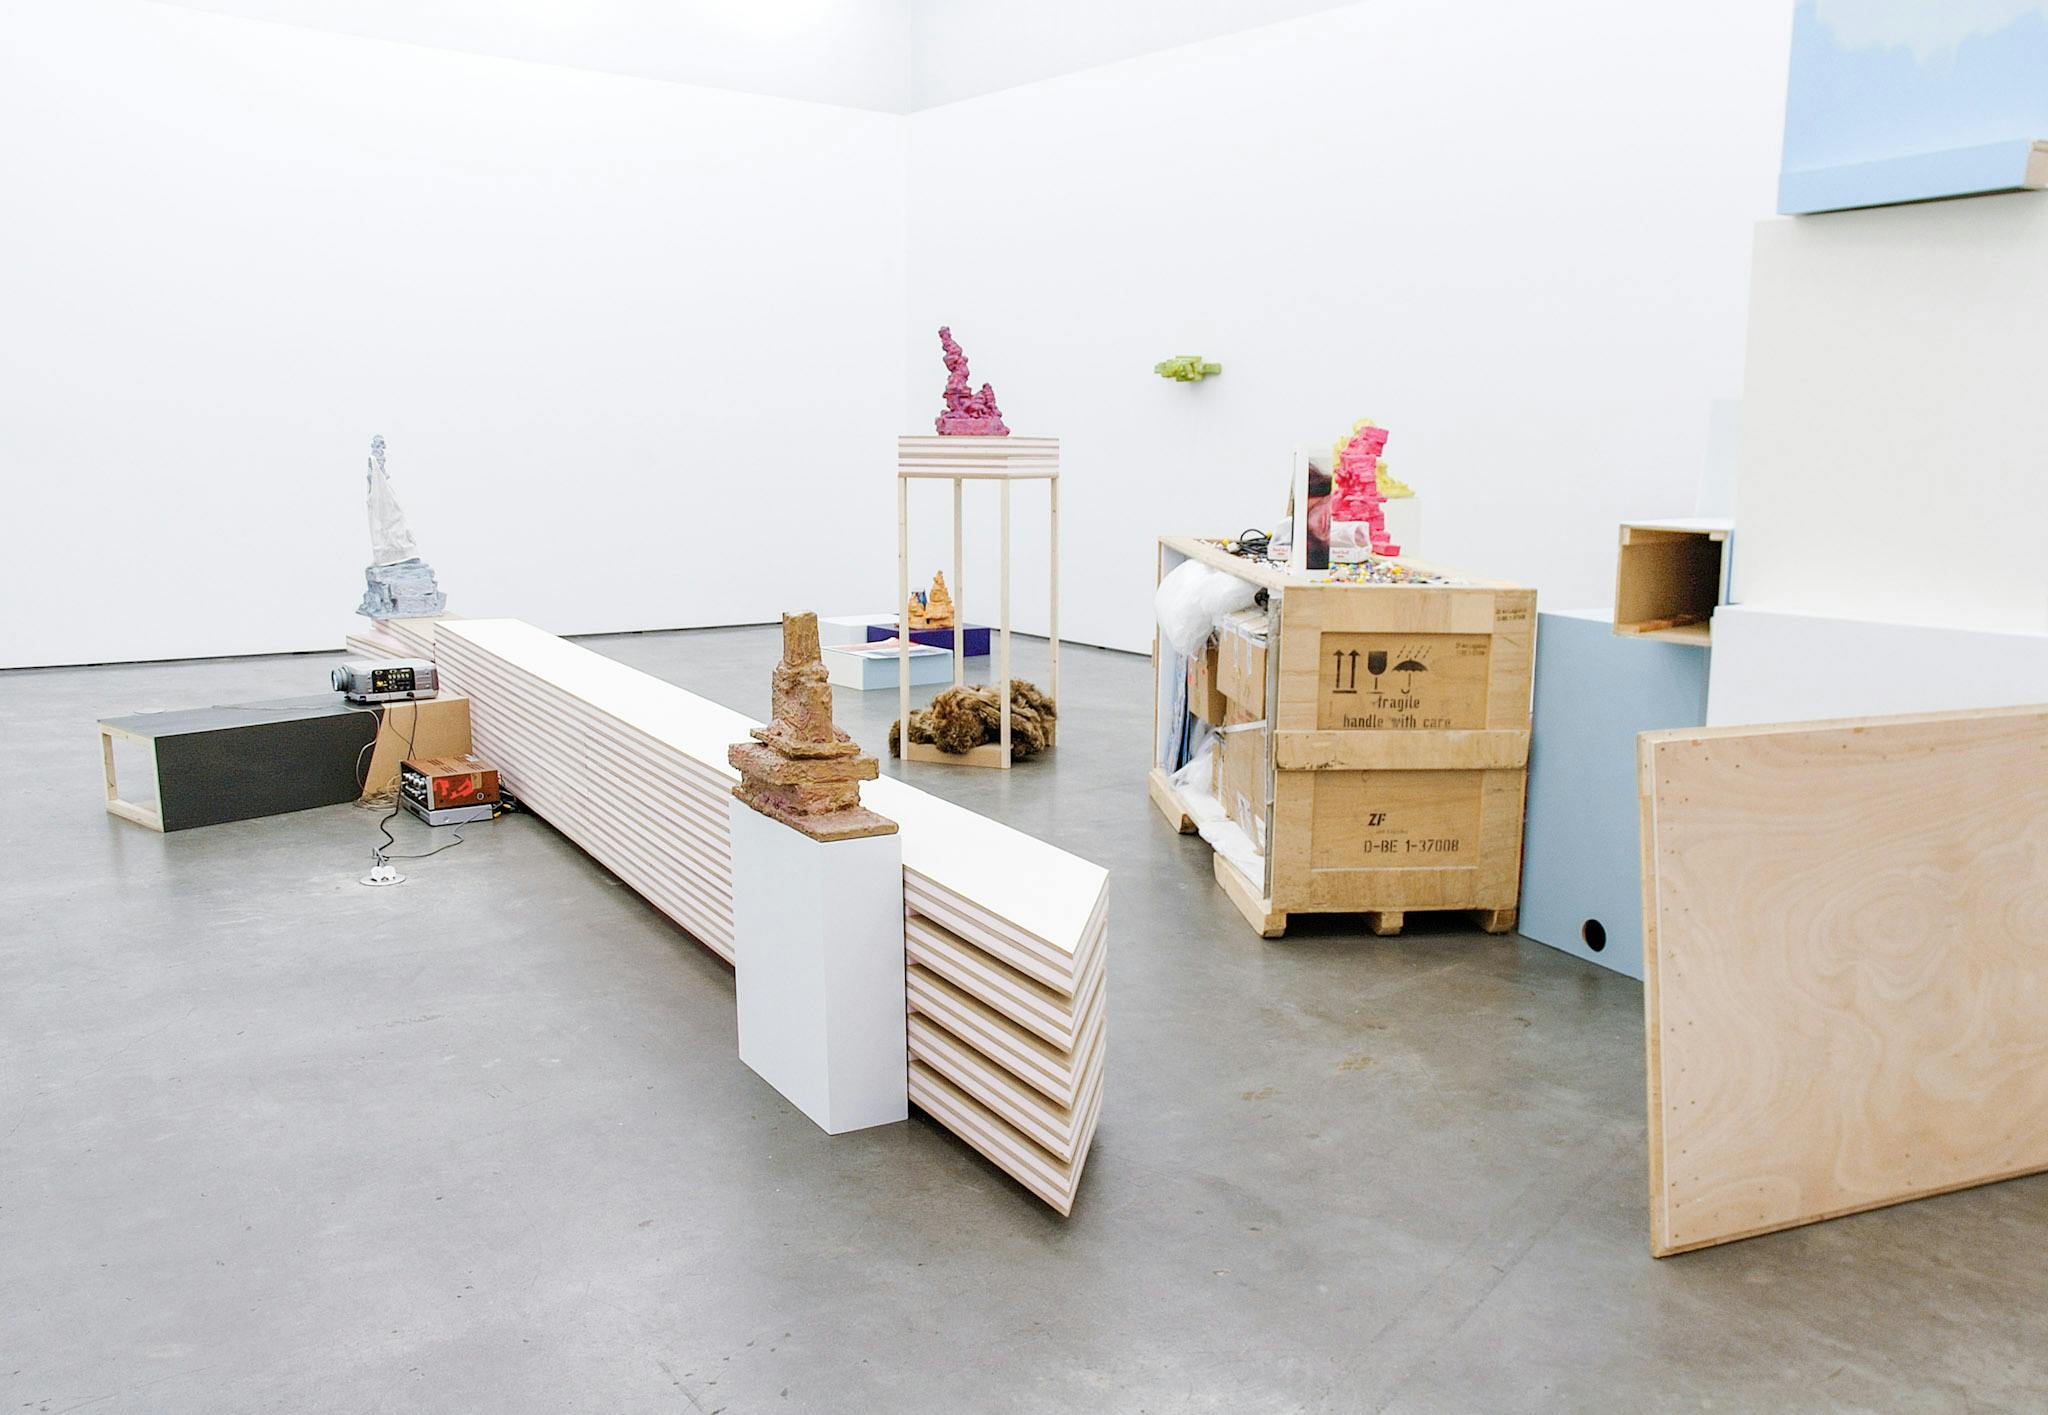 Various artworks in a gallery. The works are composed of wood, foam and paint. Some resemble shipping containers, some are small vertical constructions painted in bright colours like pink and green.